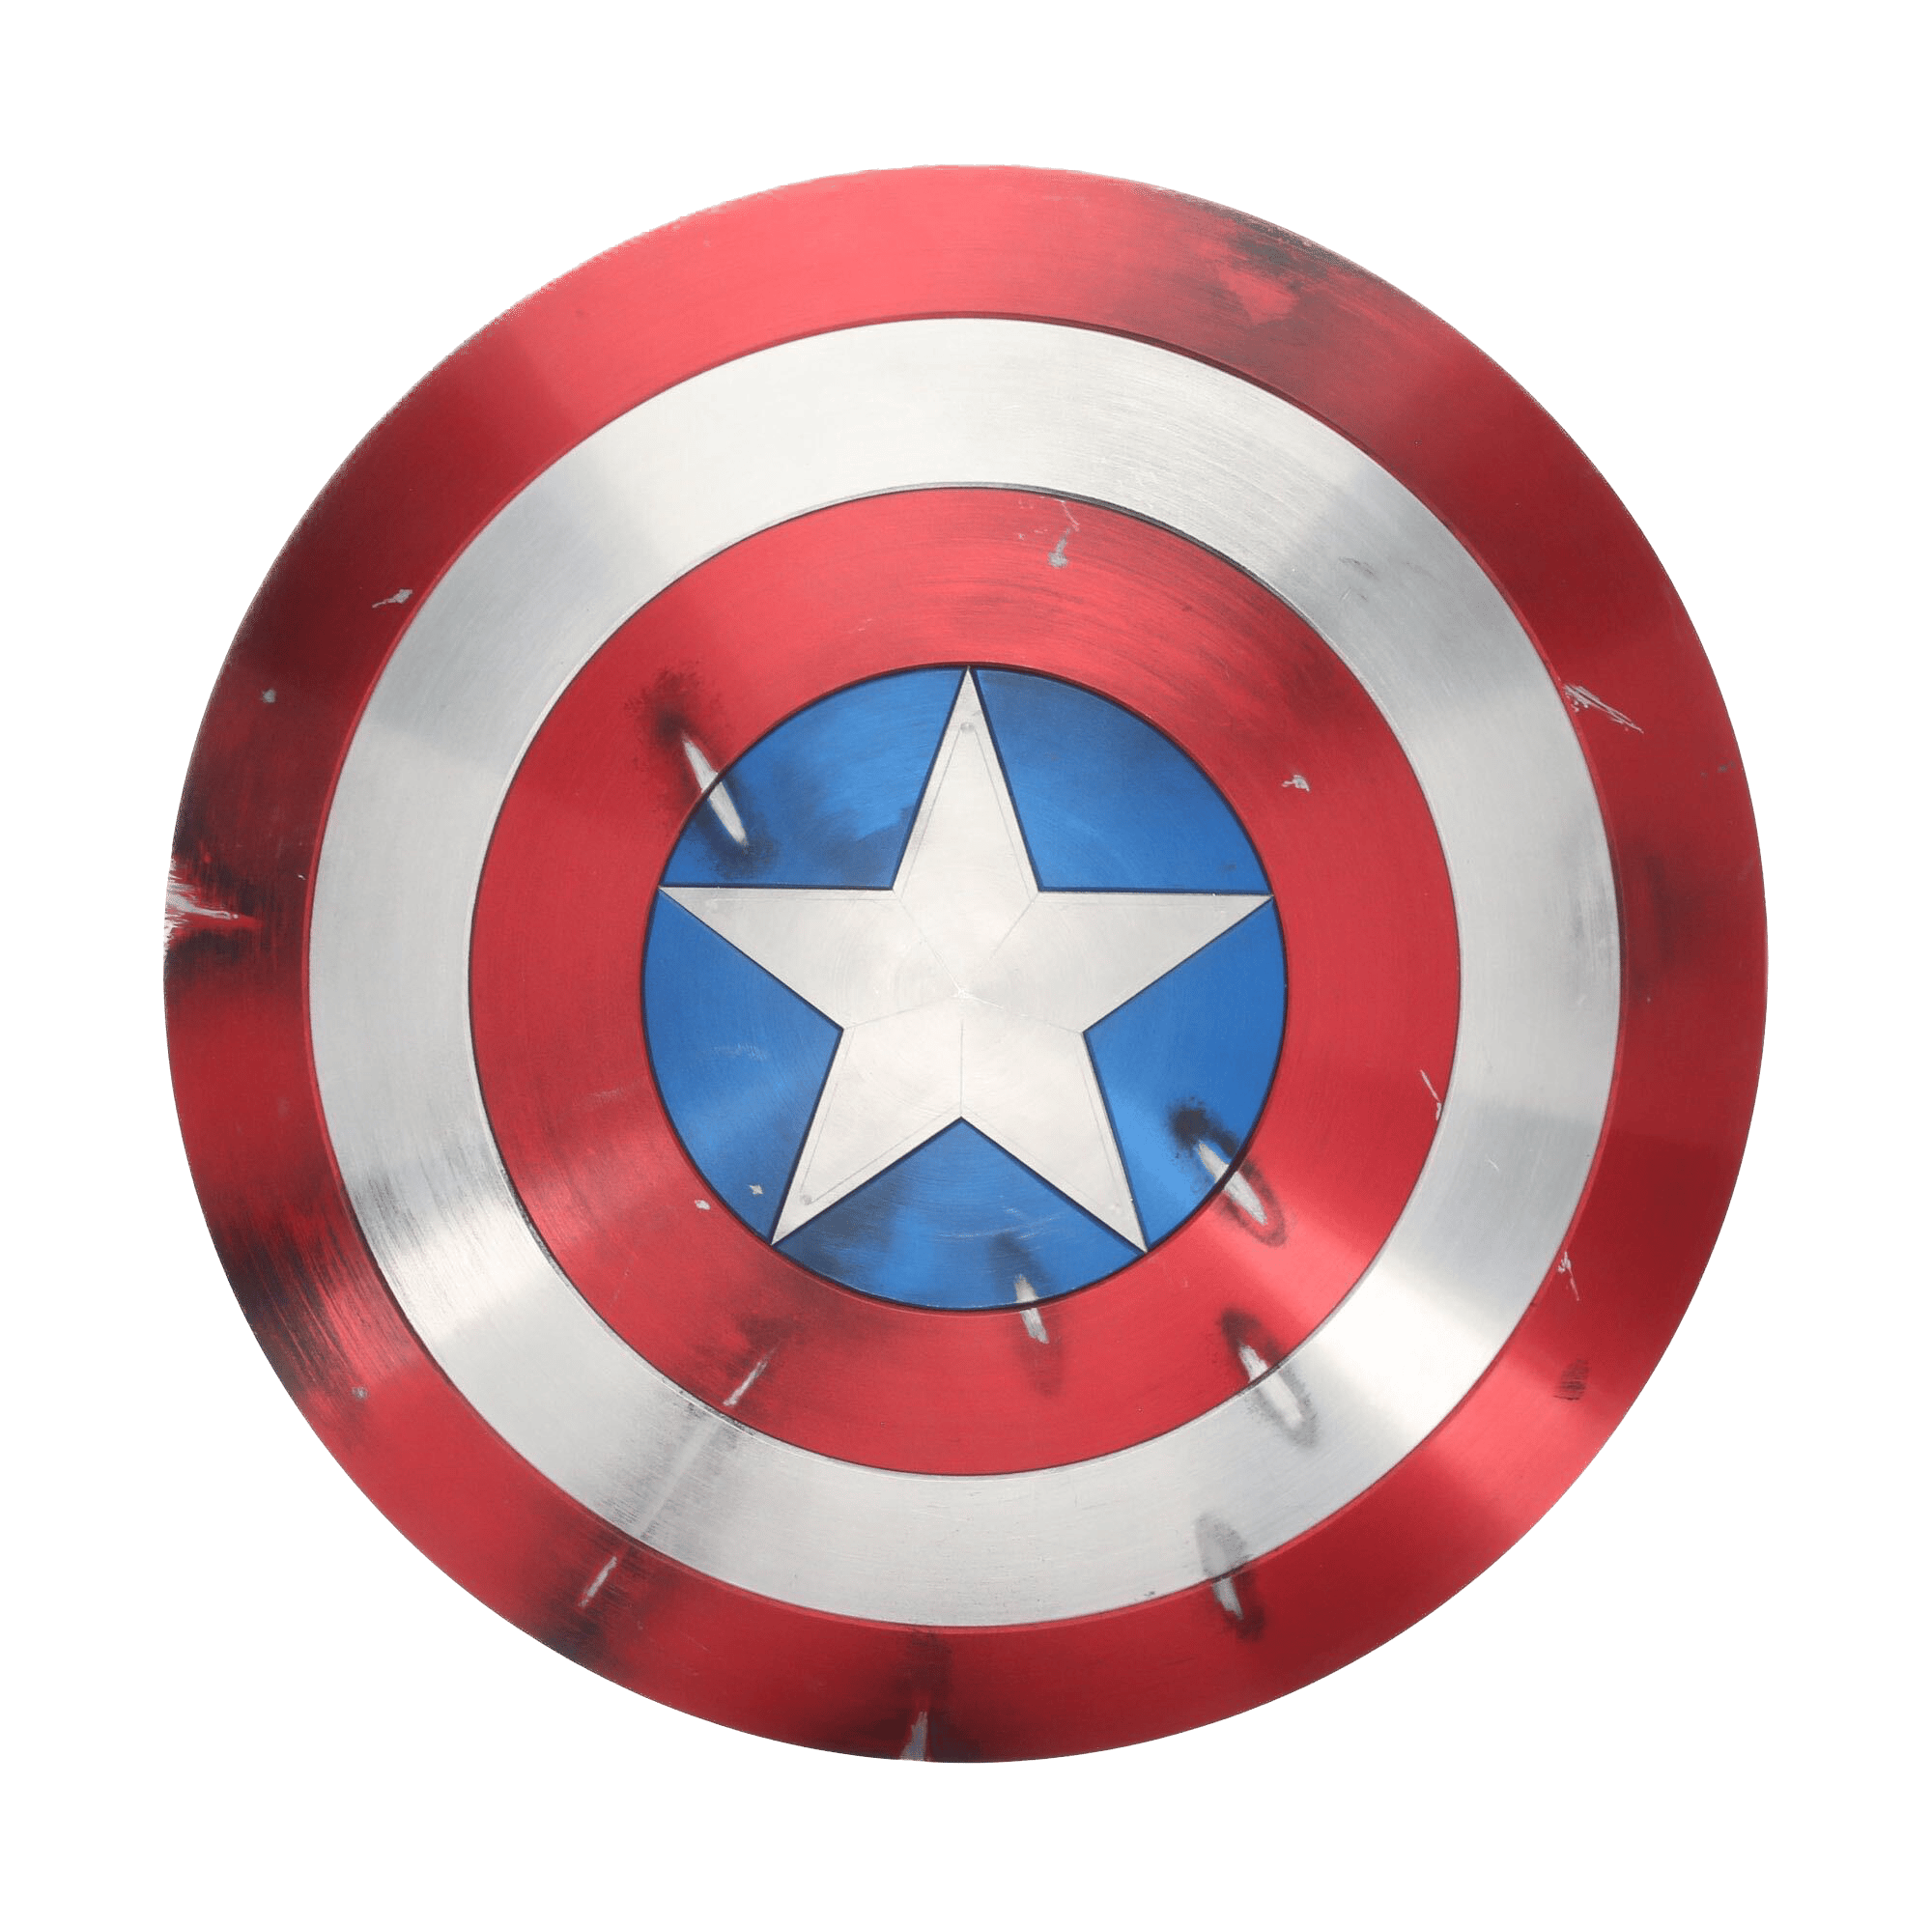 Captain America's shield prop from The Avenger's films. The shield features a silver star on a blue field in the center, encircled by 3 alternating red and silver rings. There are marks on the shield to indicate battle damage.